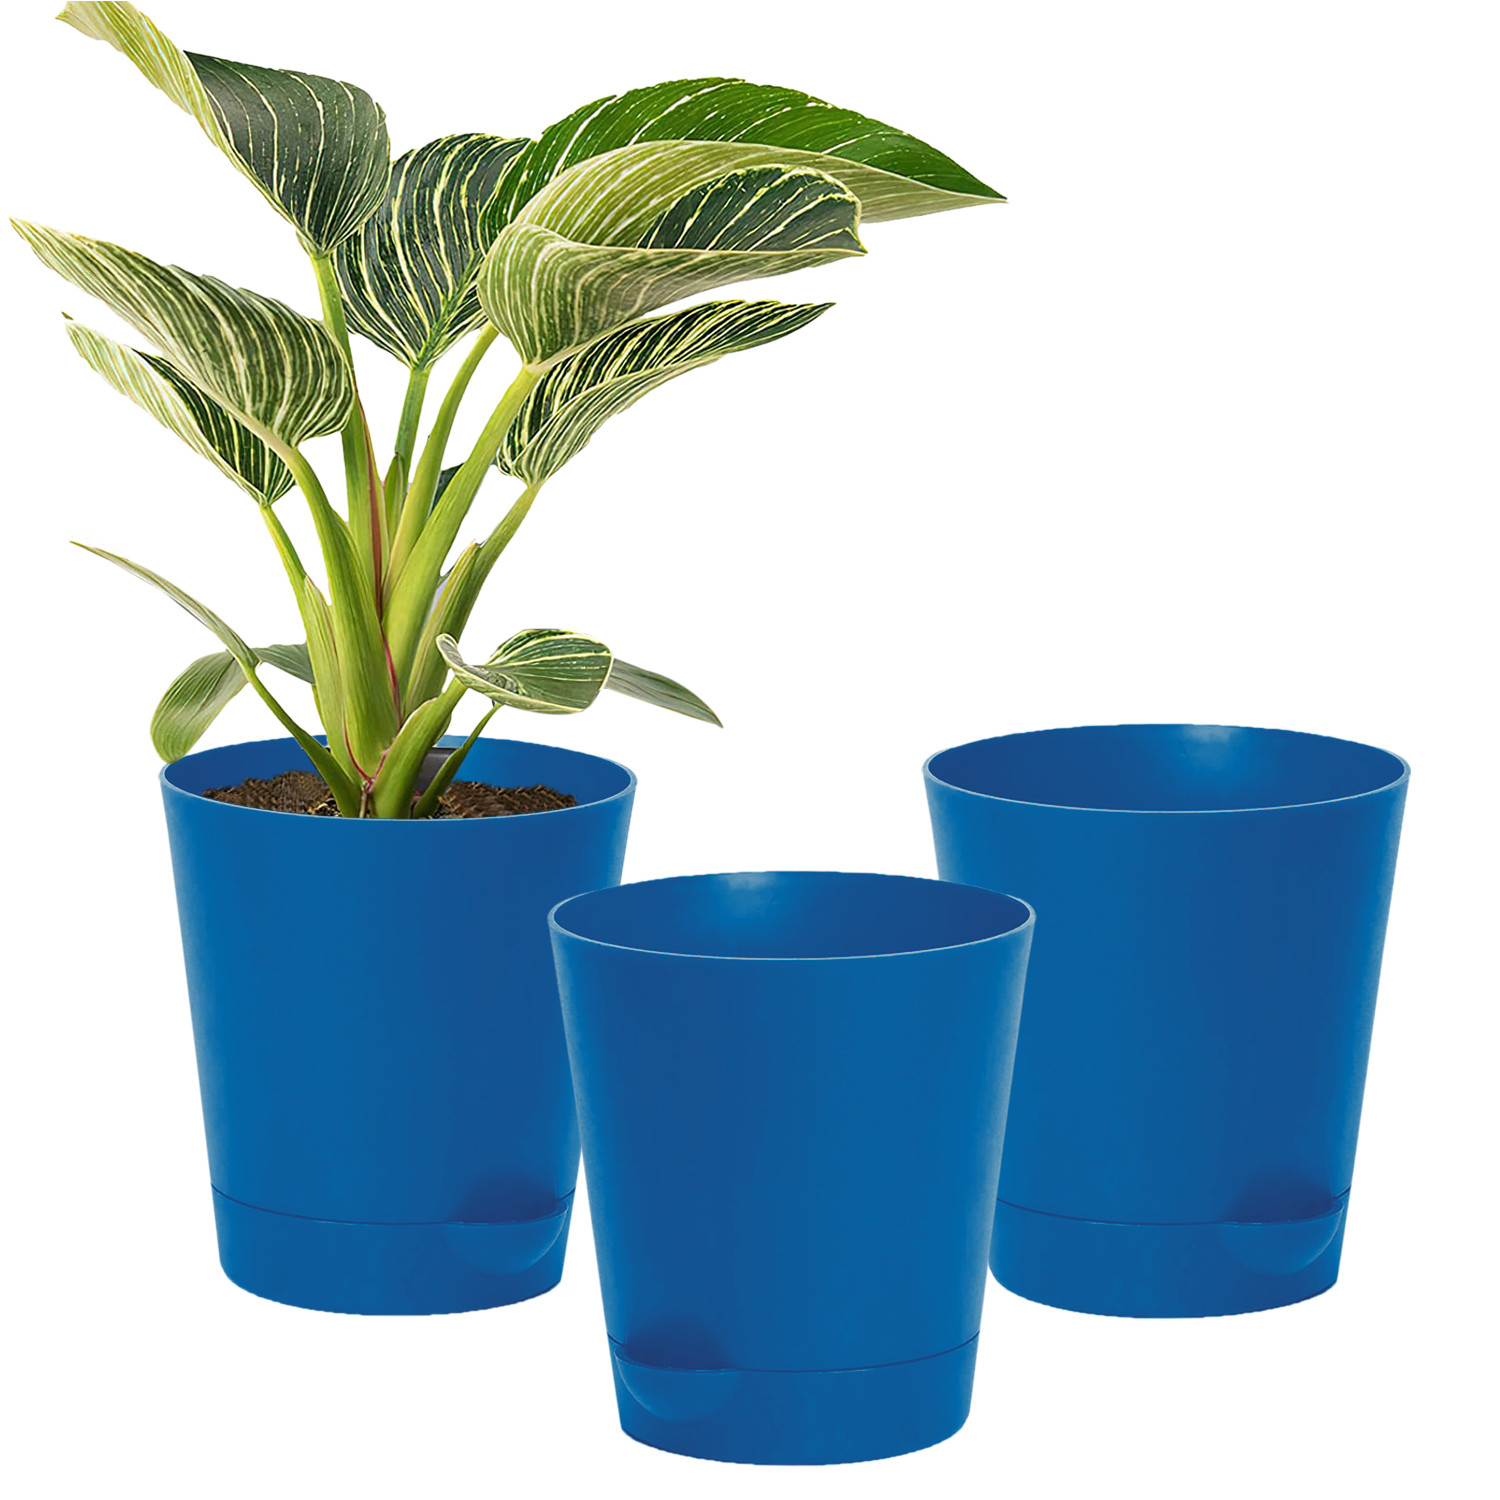 Kuber Industries Plastic Titan Pot|Garden Container For Plants & Flowers|Self-Watering Pot With Drainage Holes,6 Inch (Blue)